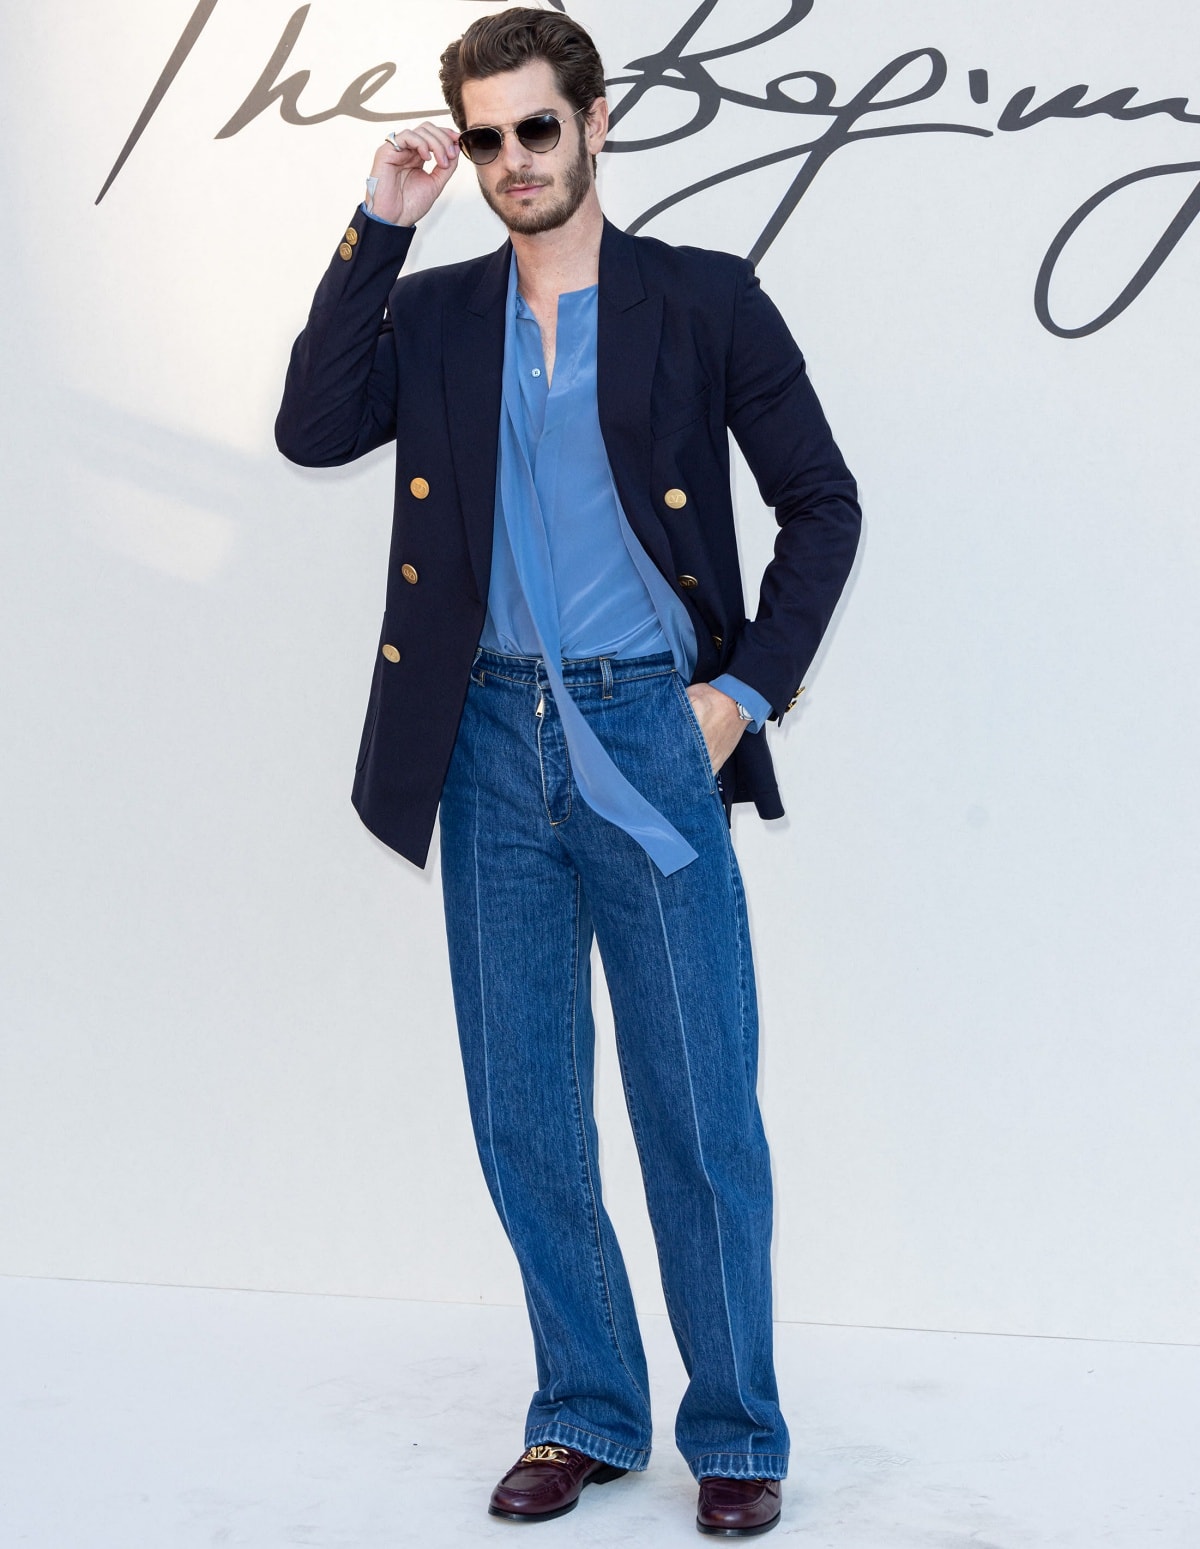 Andrew Garfield in a Valentino Pre-Fall 2022 After Club look at the Valentino Fall 2022 Haute Couture show during Rome Fashion Week